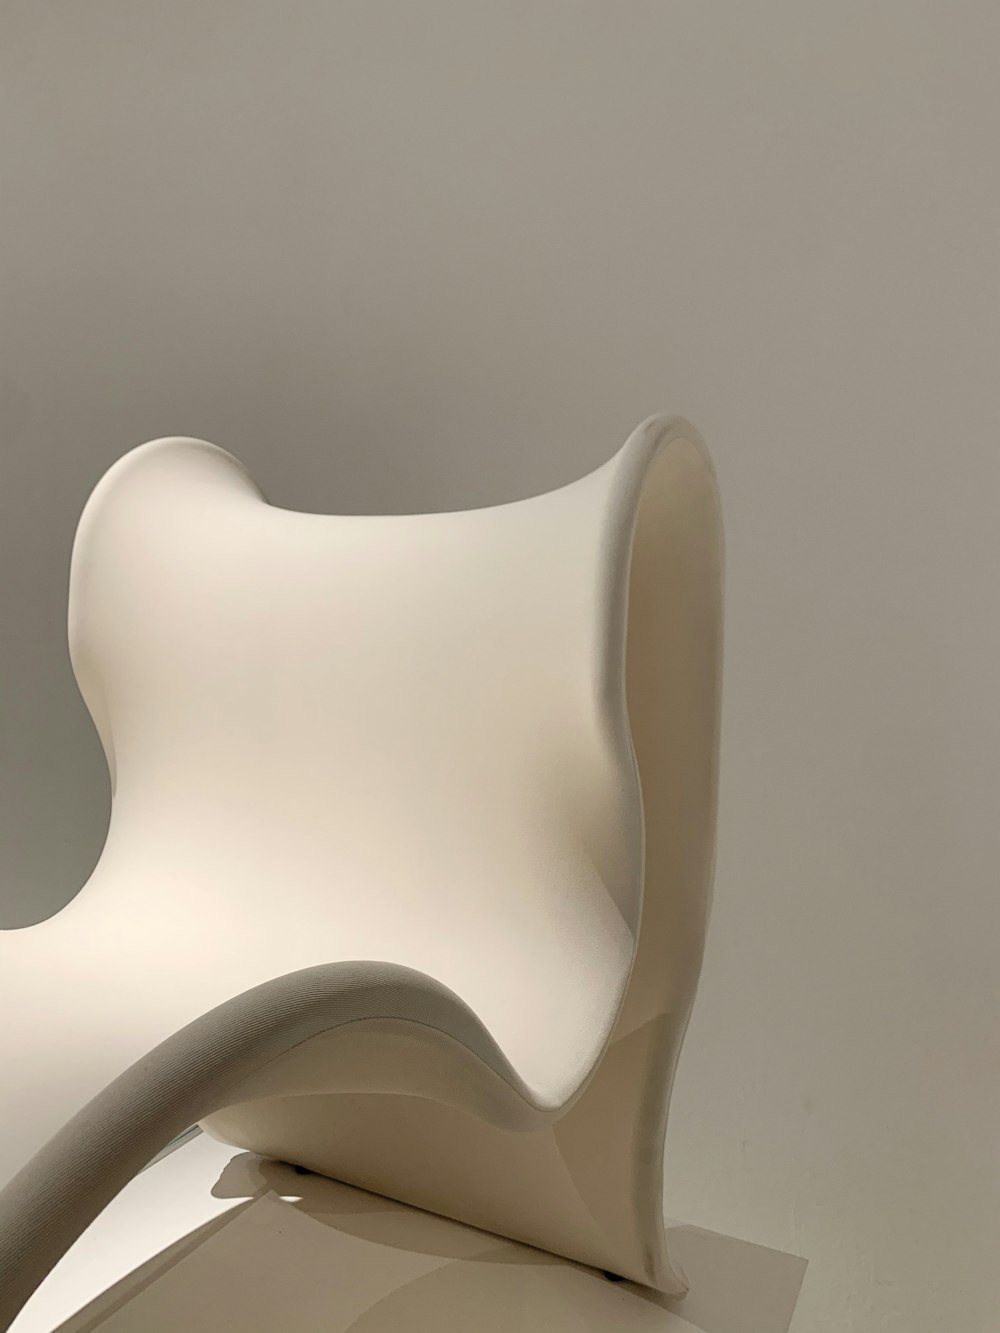 white plastic chair on white surface